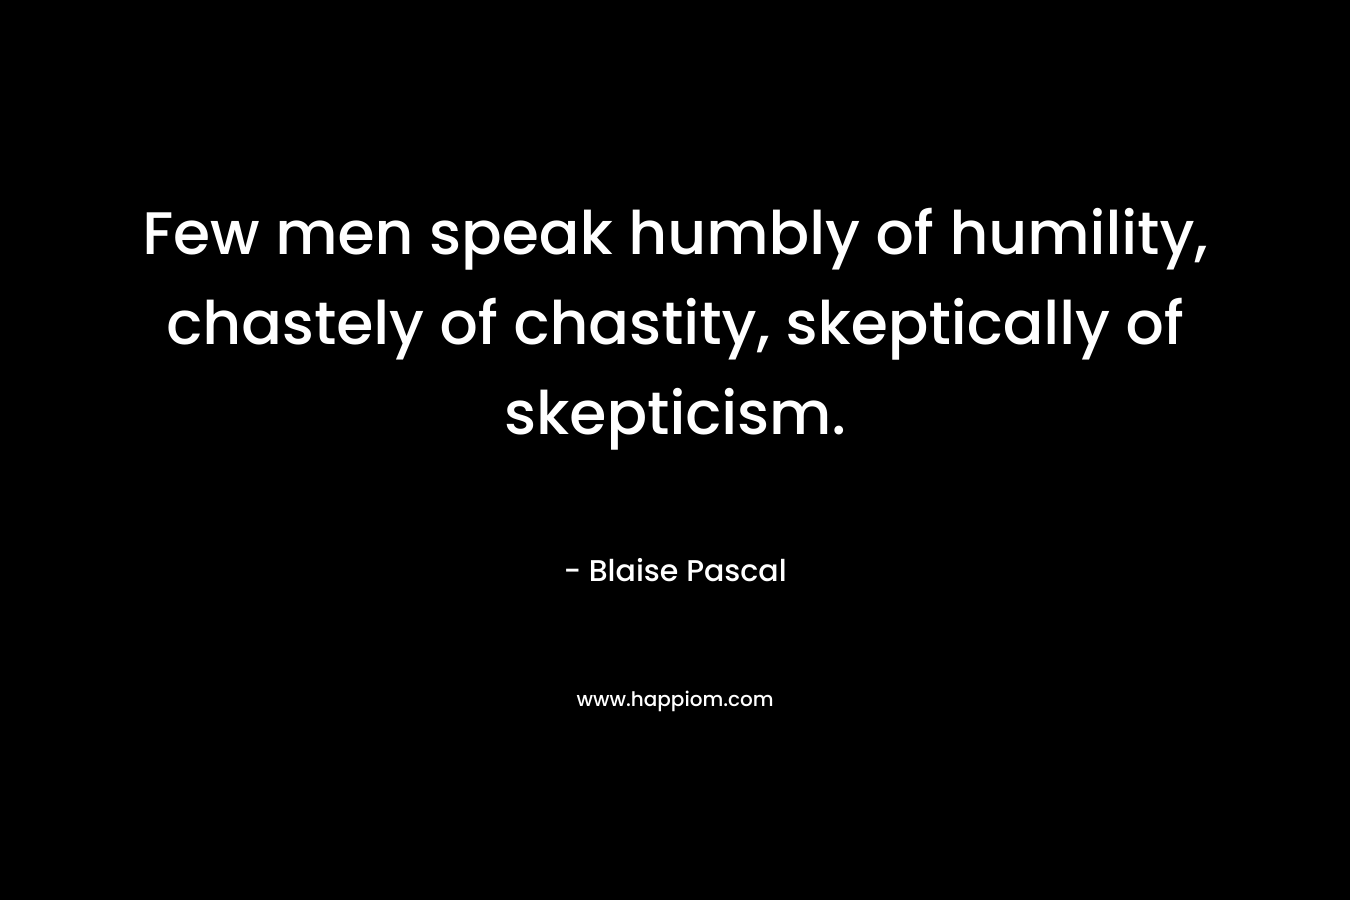 Few men speak humbly of humility, chastely of chastity, skeptically of skepticism. – Blaise Pascal